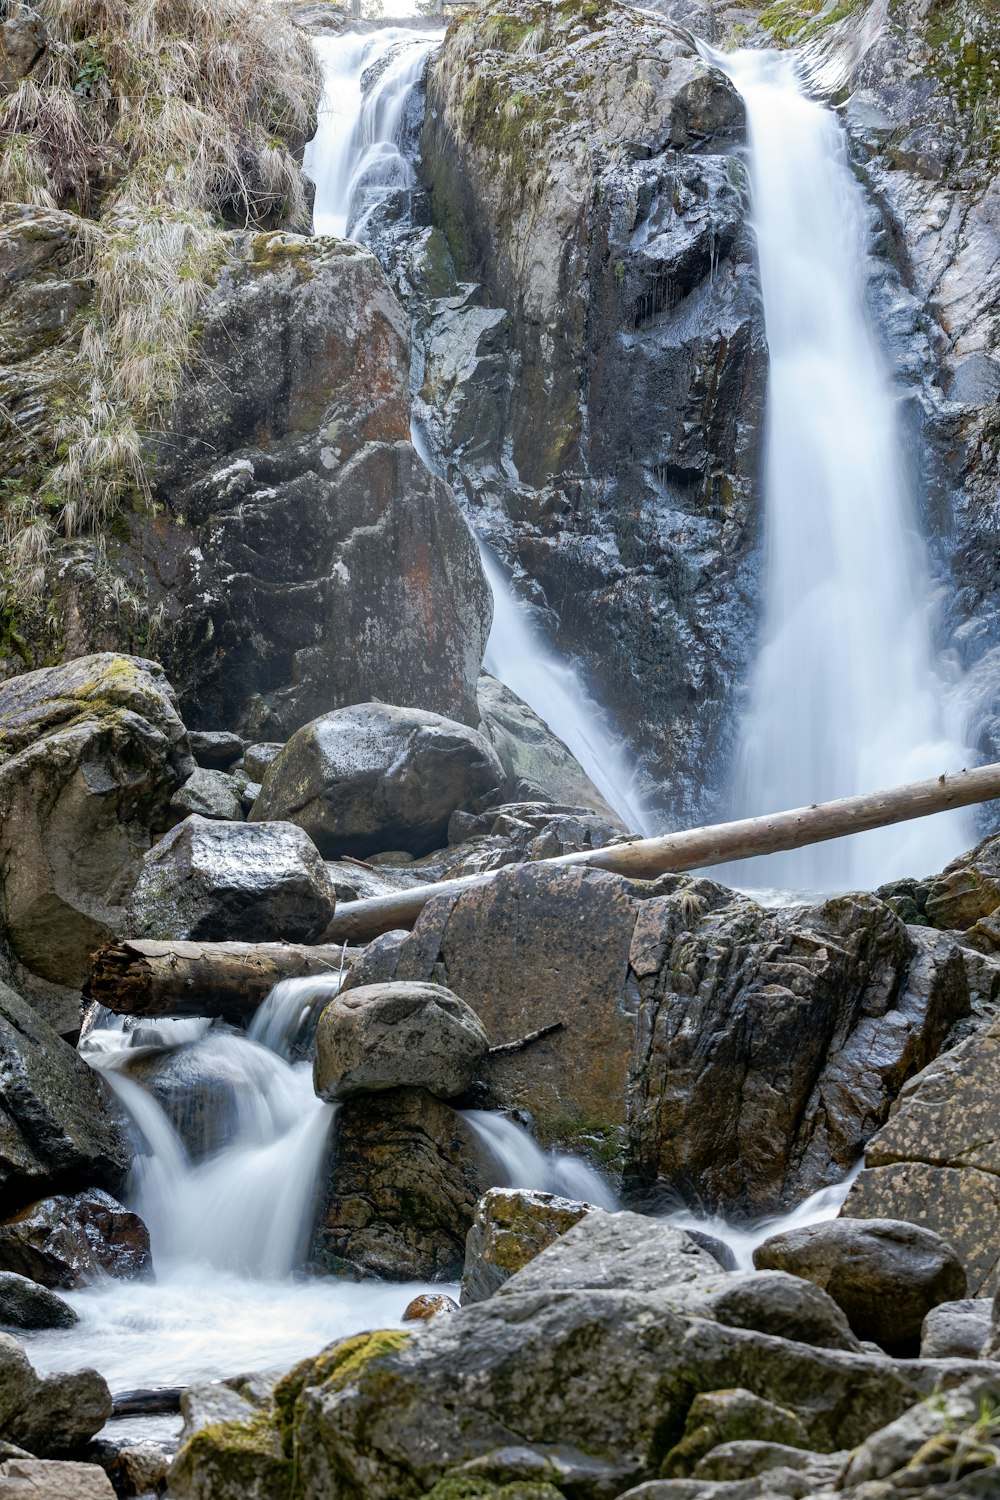 a large waterfall with a wooden bridge over it